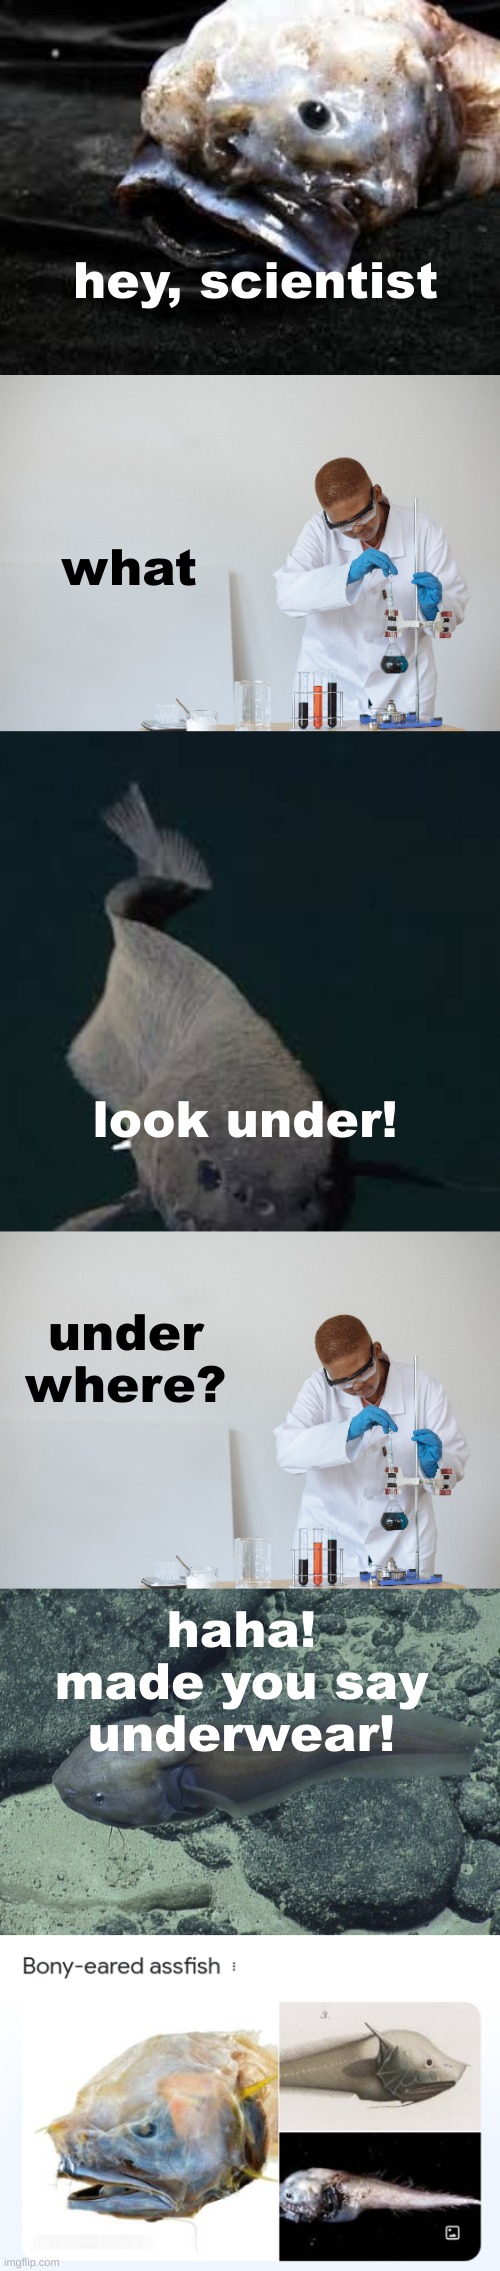 hey, scientist; what; look under! under where? haha! made you say underwear! | made w/ Imgflip meme maker